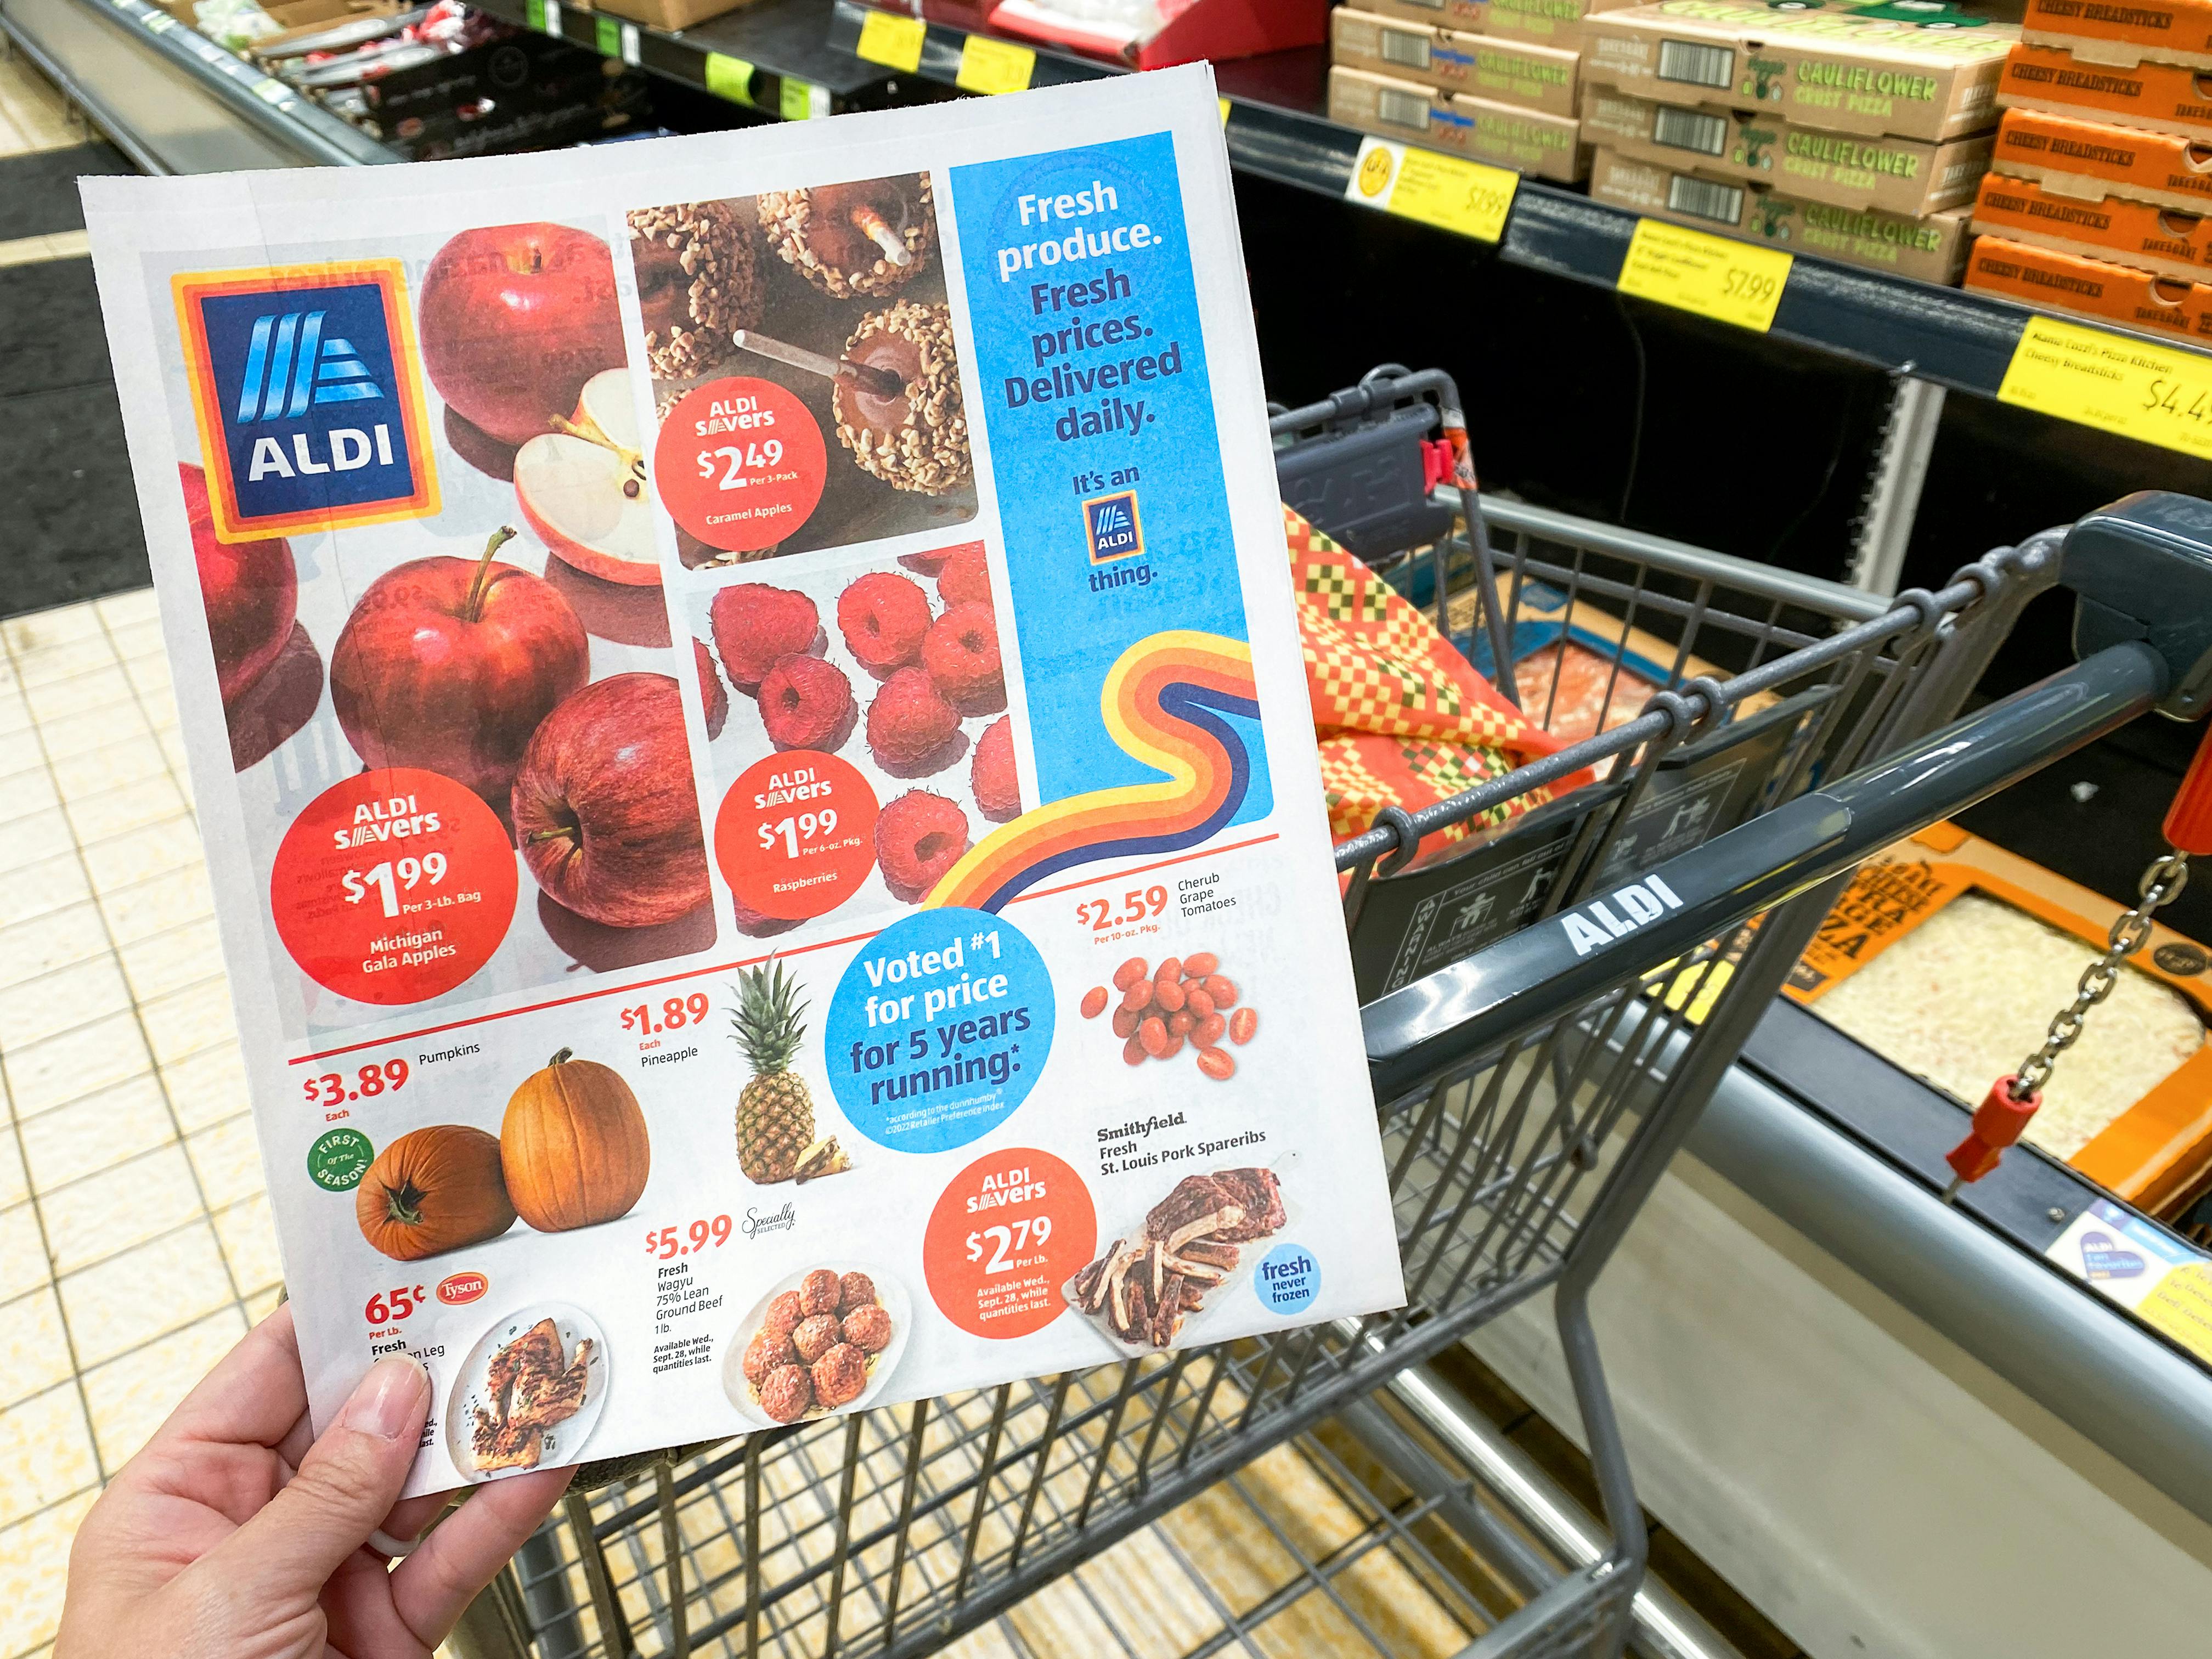 Aldi Savers and Other Price Tags: Here's What Each One Means